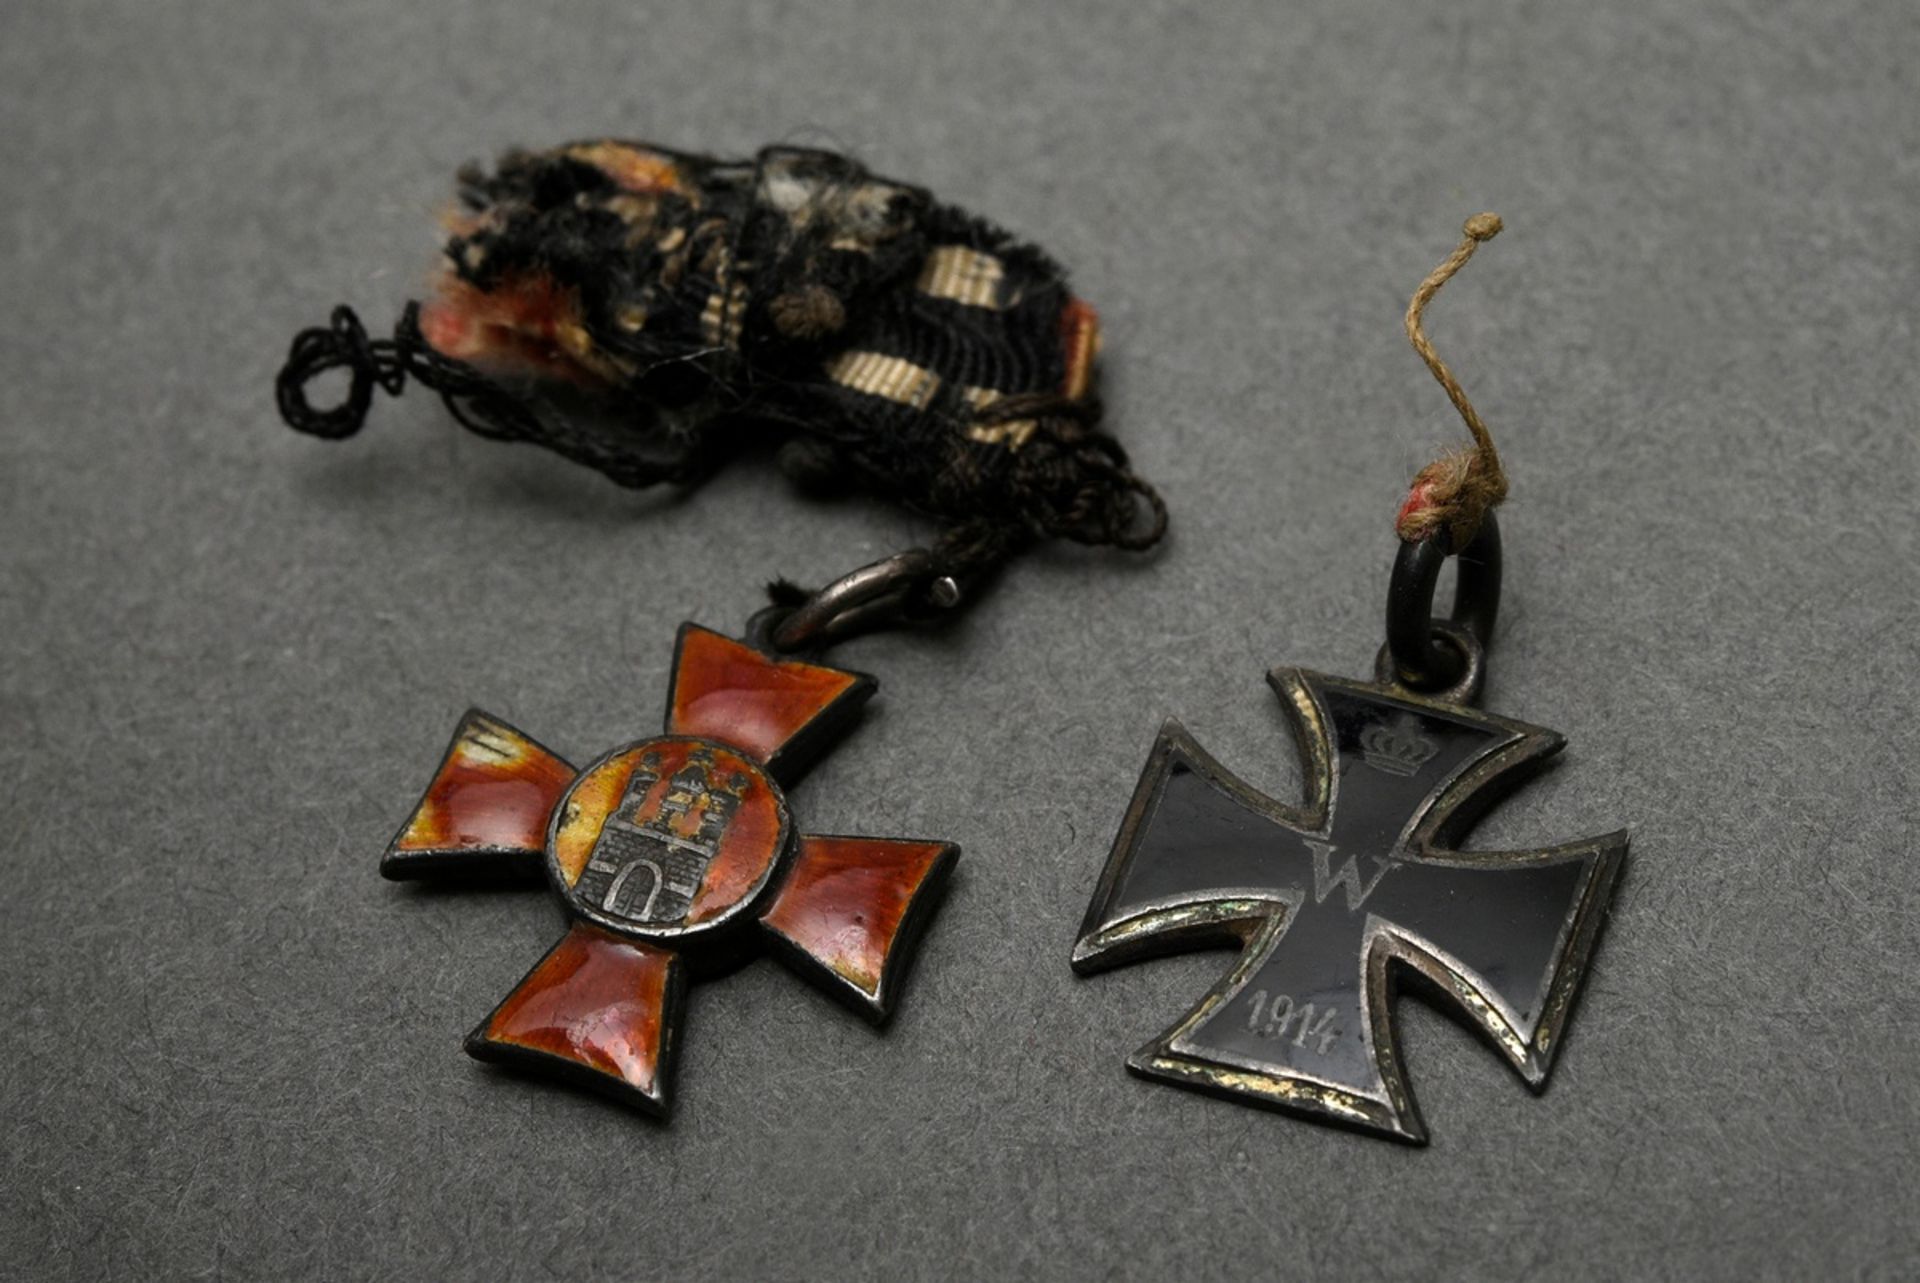 2 Various medal miniatures First World War: Iron Cross 1914 (silver 800 enamelled, ca. 2x1,5cm) and